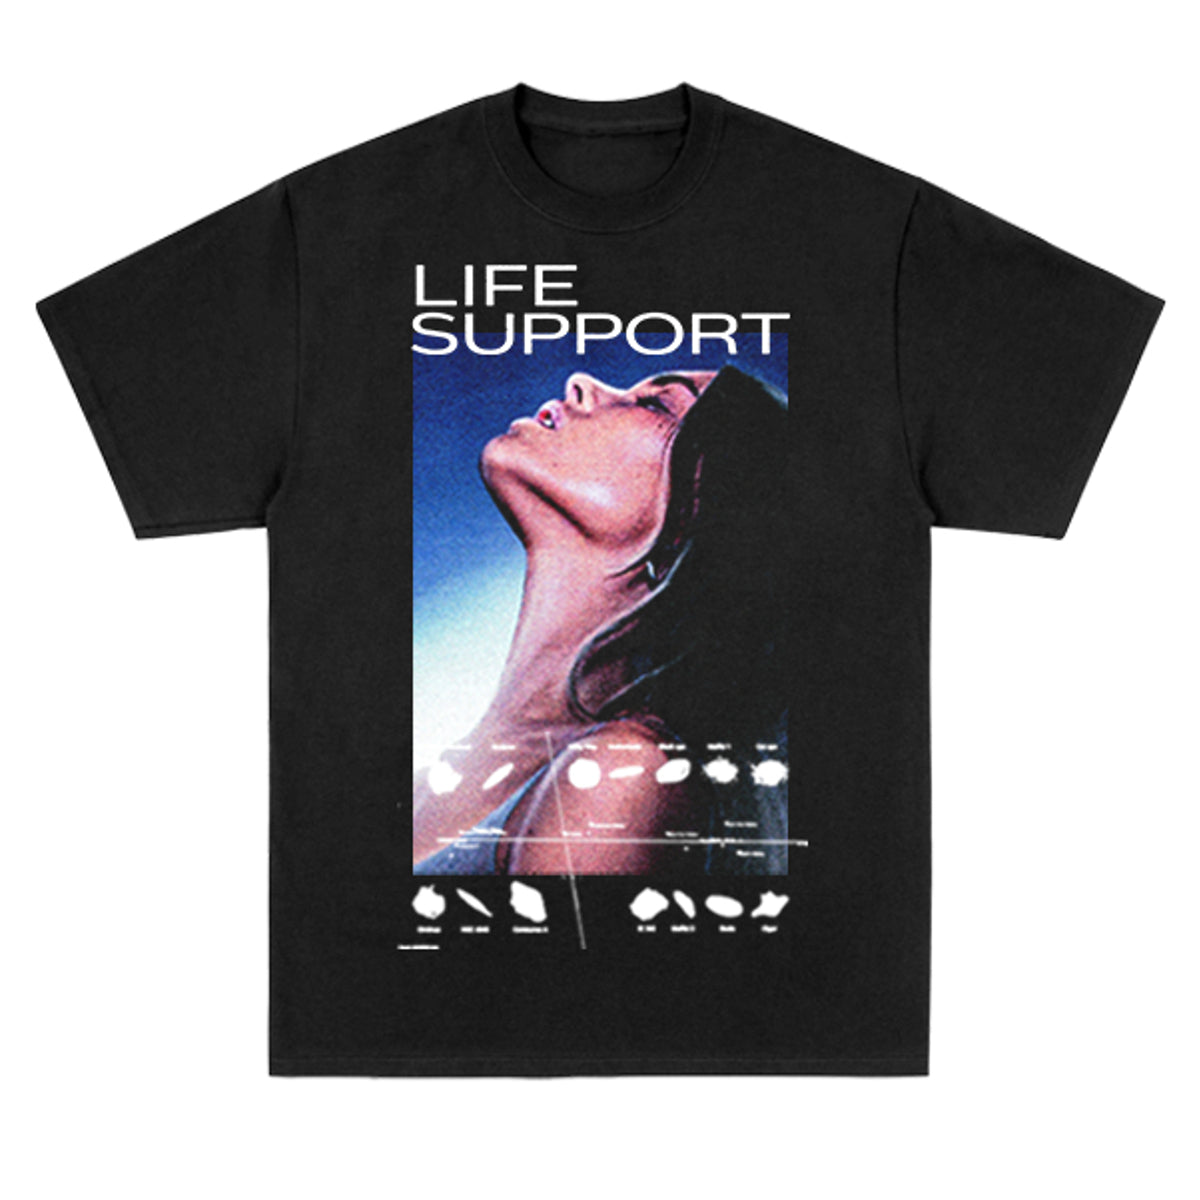 Life Support Tour US Photo Date Black T-Shirt